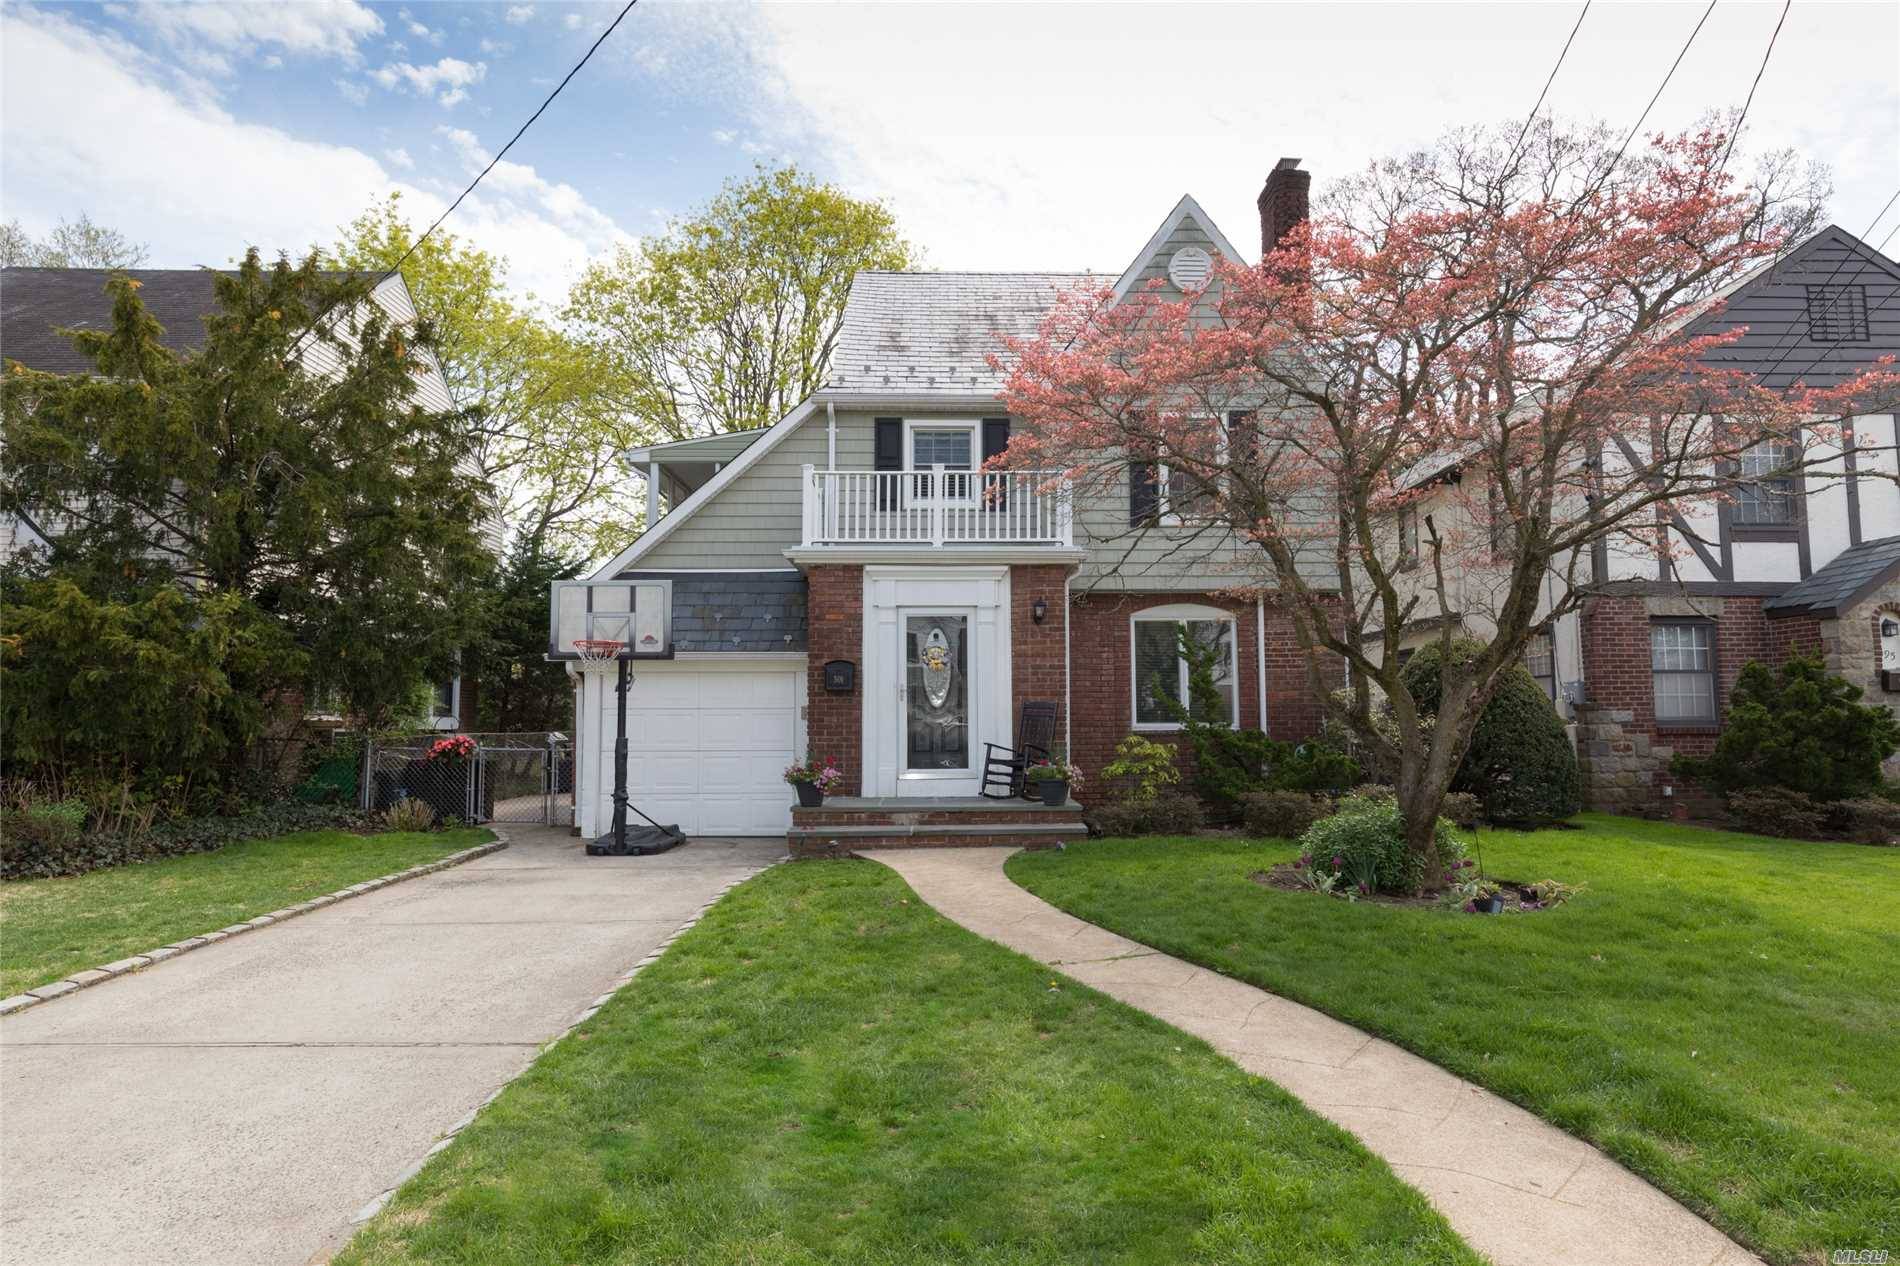 This Charming Colonial Is Situated In The Unincorporated Village Of Lynbrook With Low Taxes.